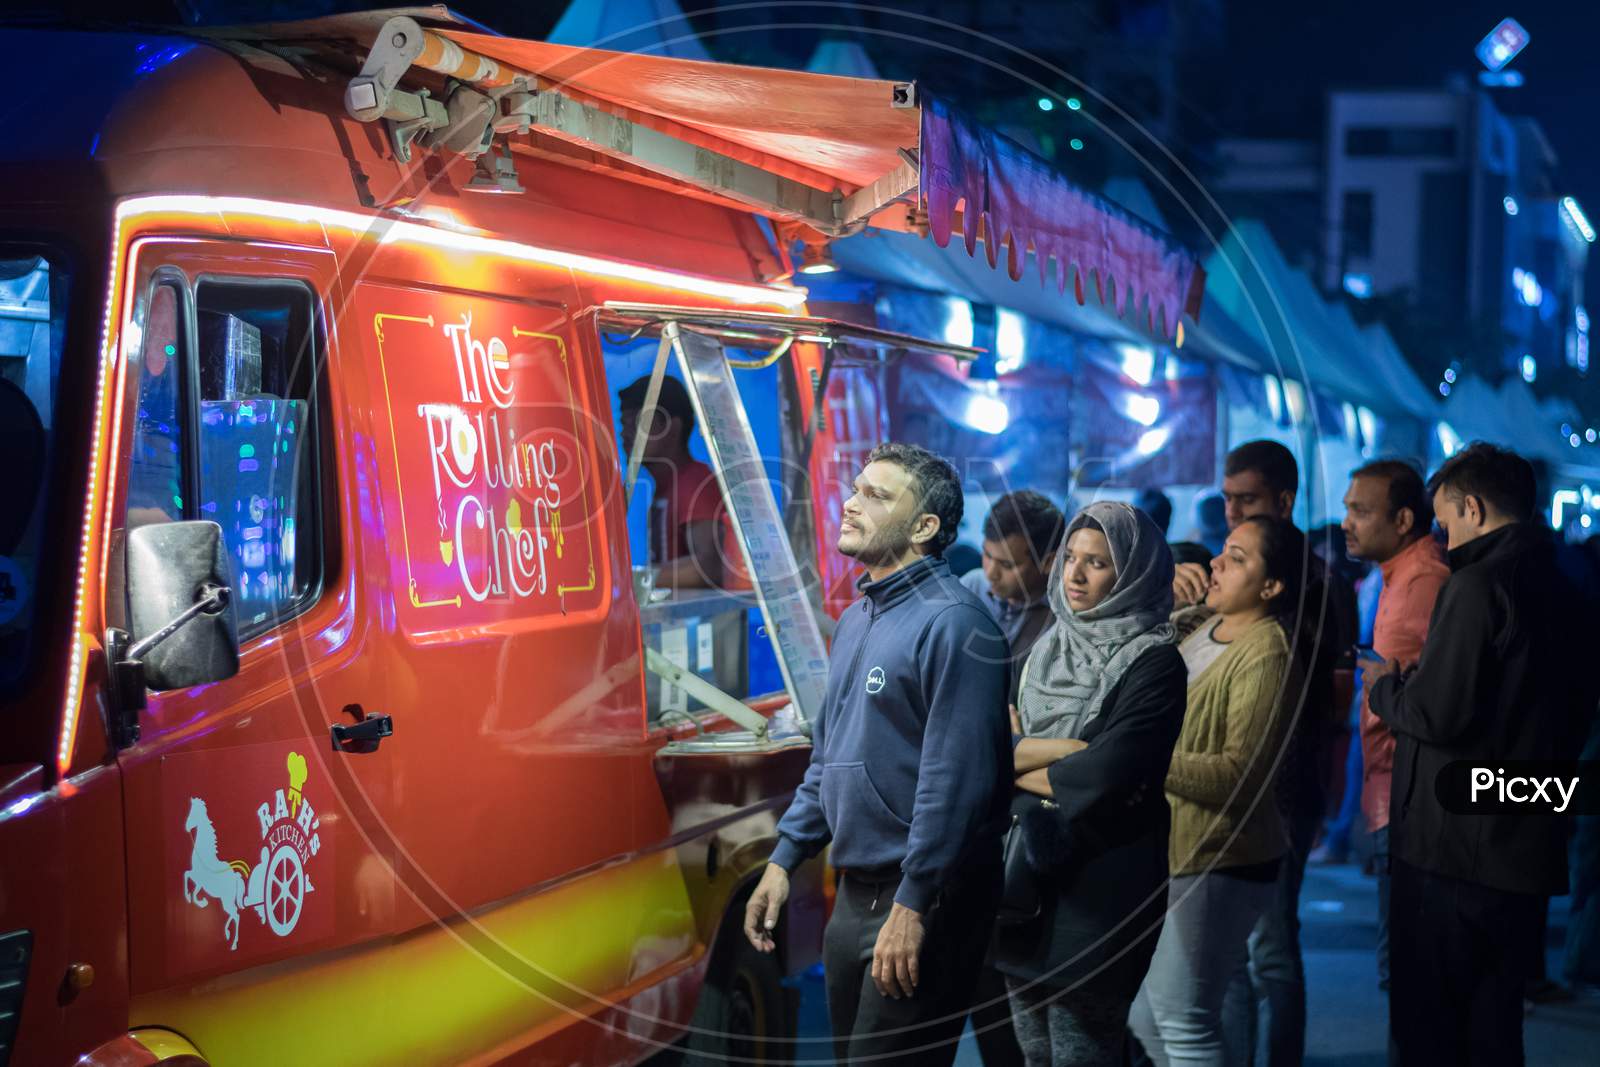 Bangalore, Karnataka / India - August 08 2019: A group of people waiting outside a red food truck for their orders during night time